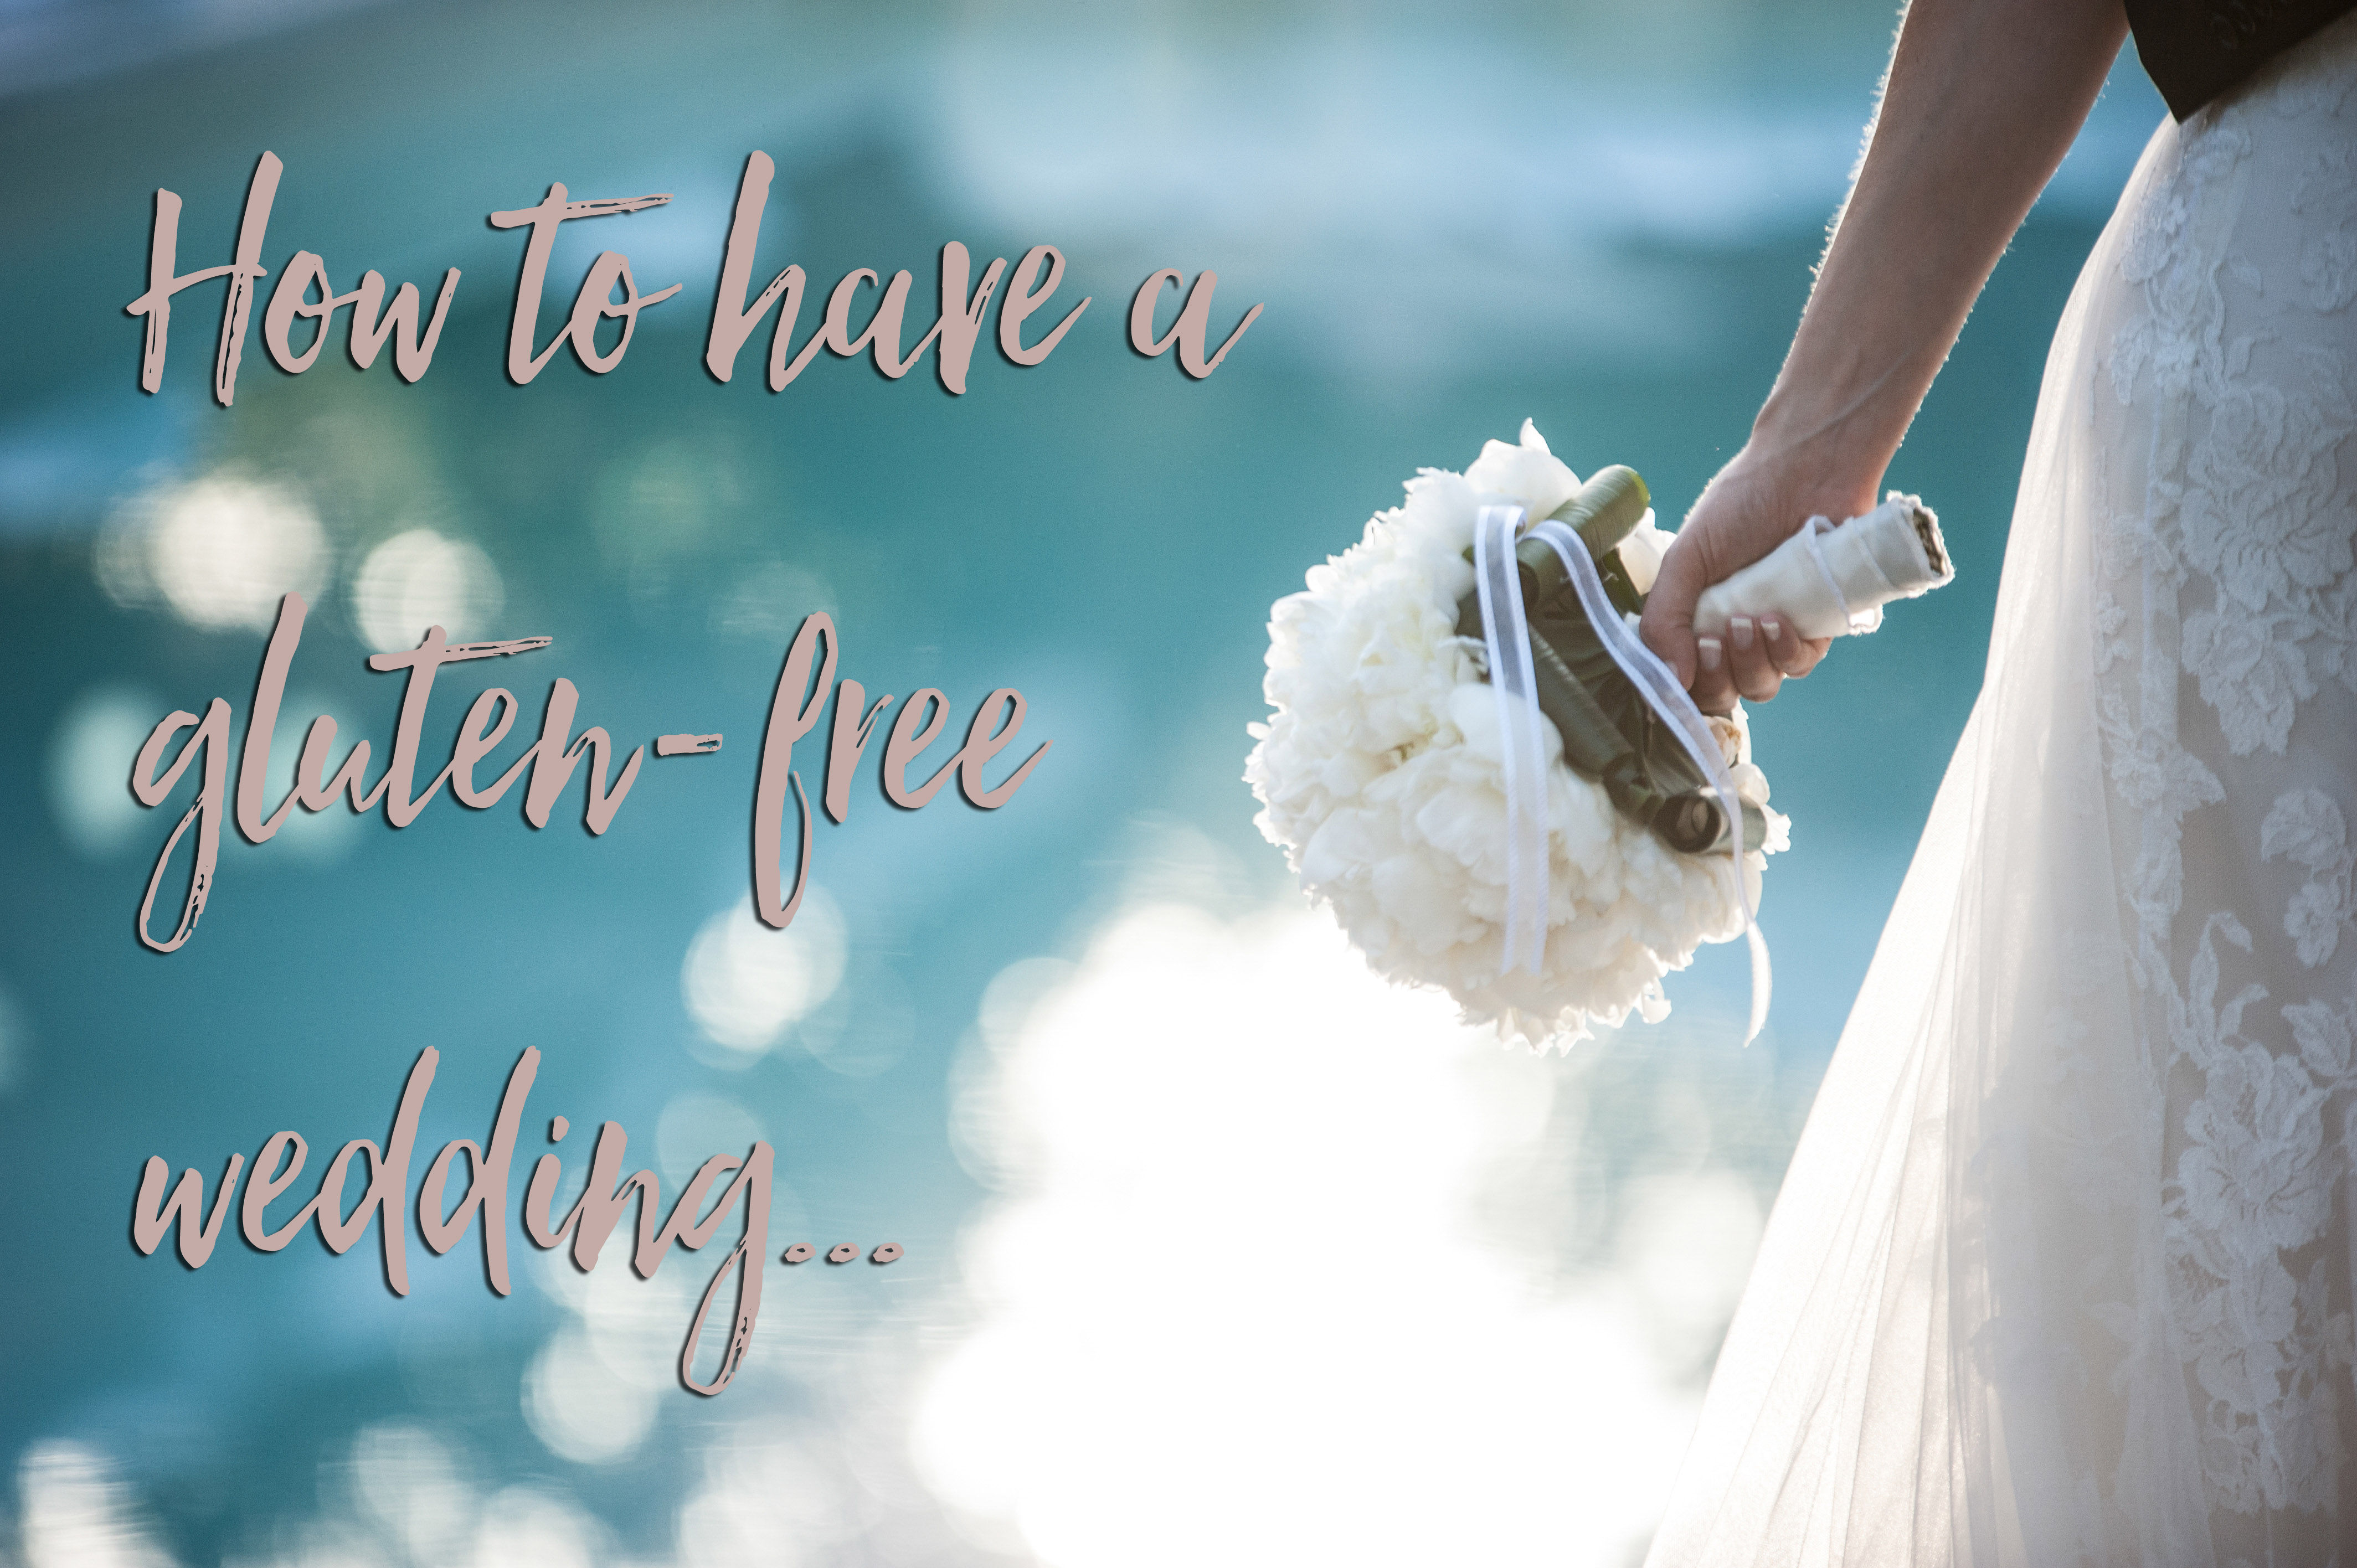 How to have a gluten-free wedding